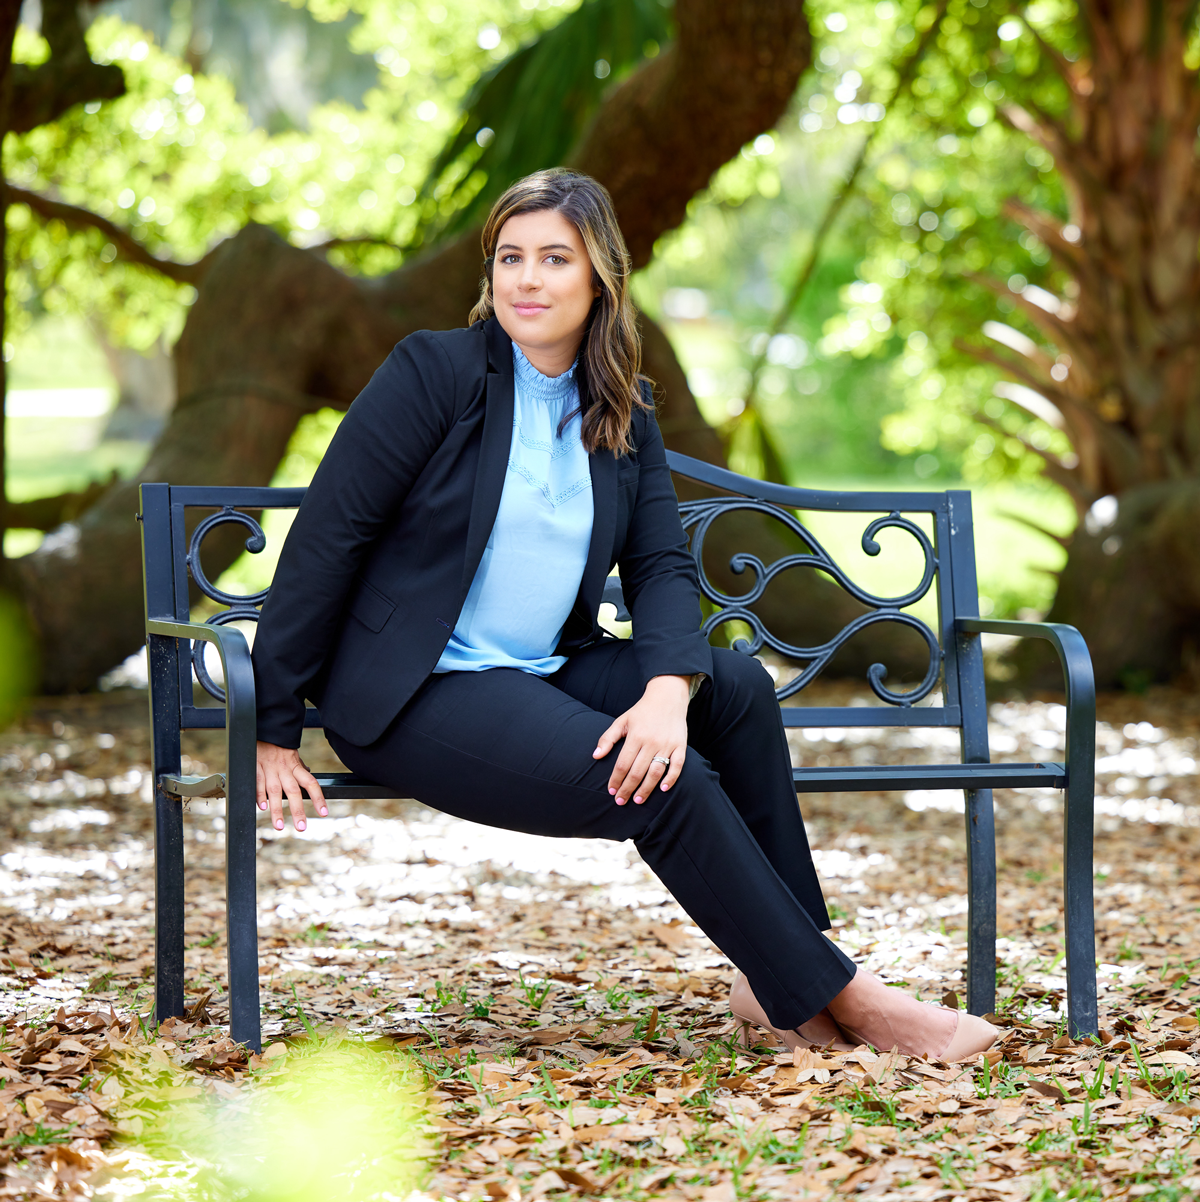 Carmen Liriano - Personal Injury Attorney at Law sitting on Park Bench